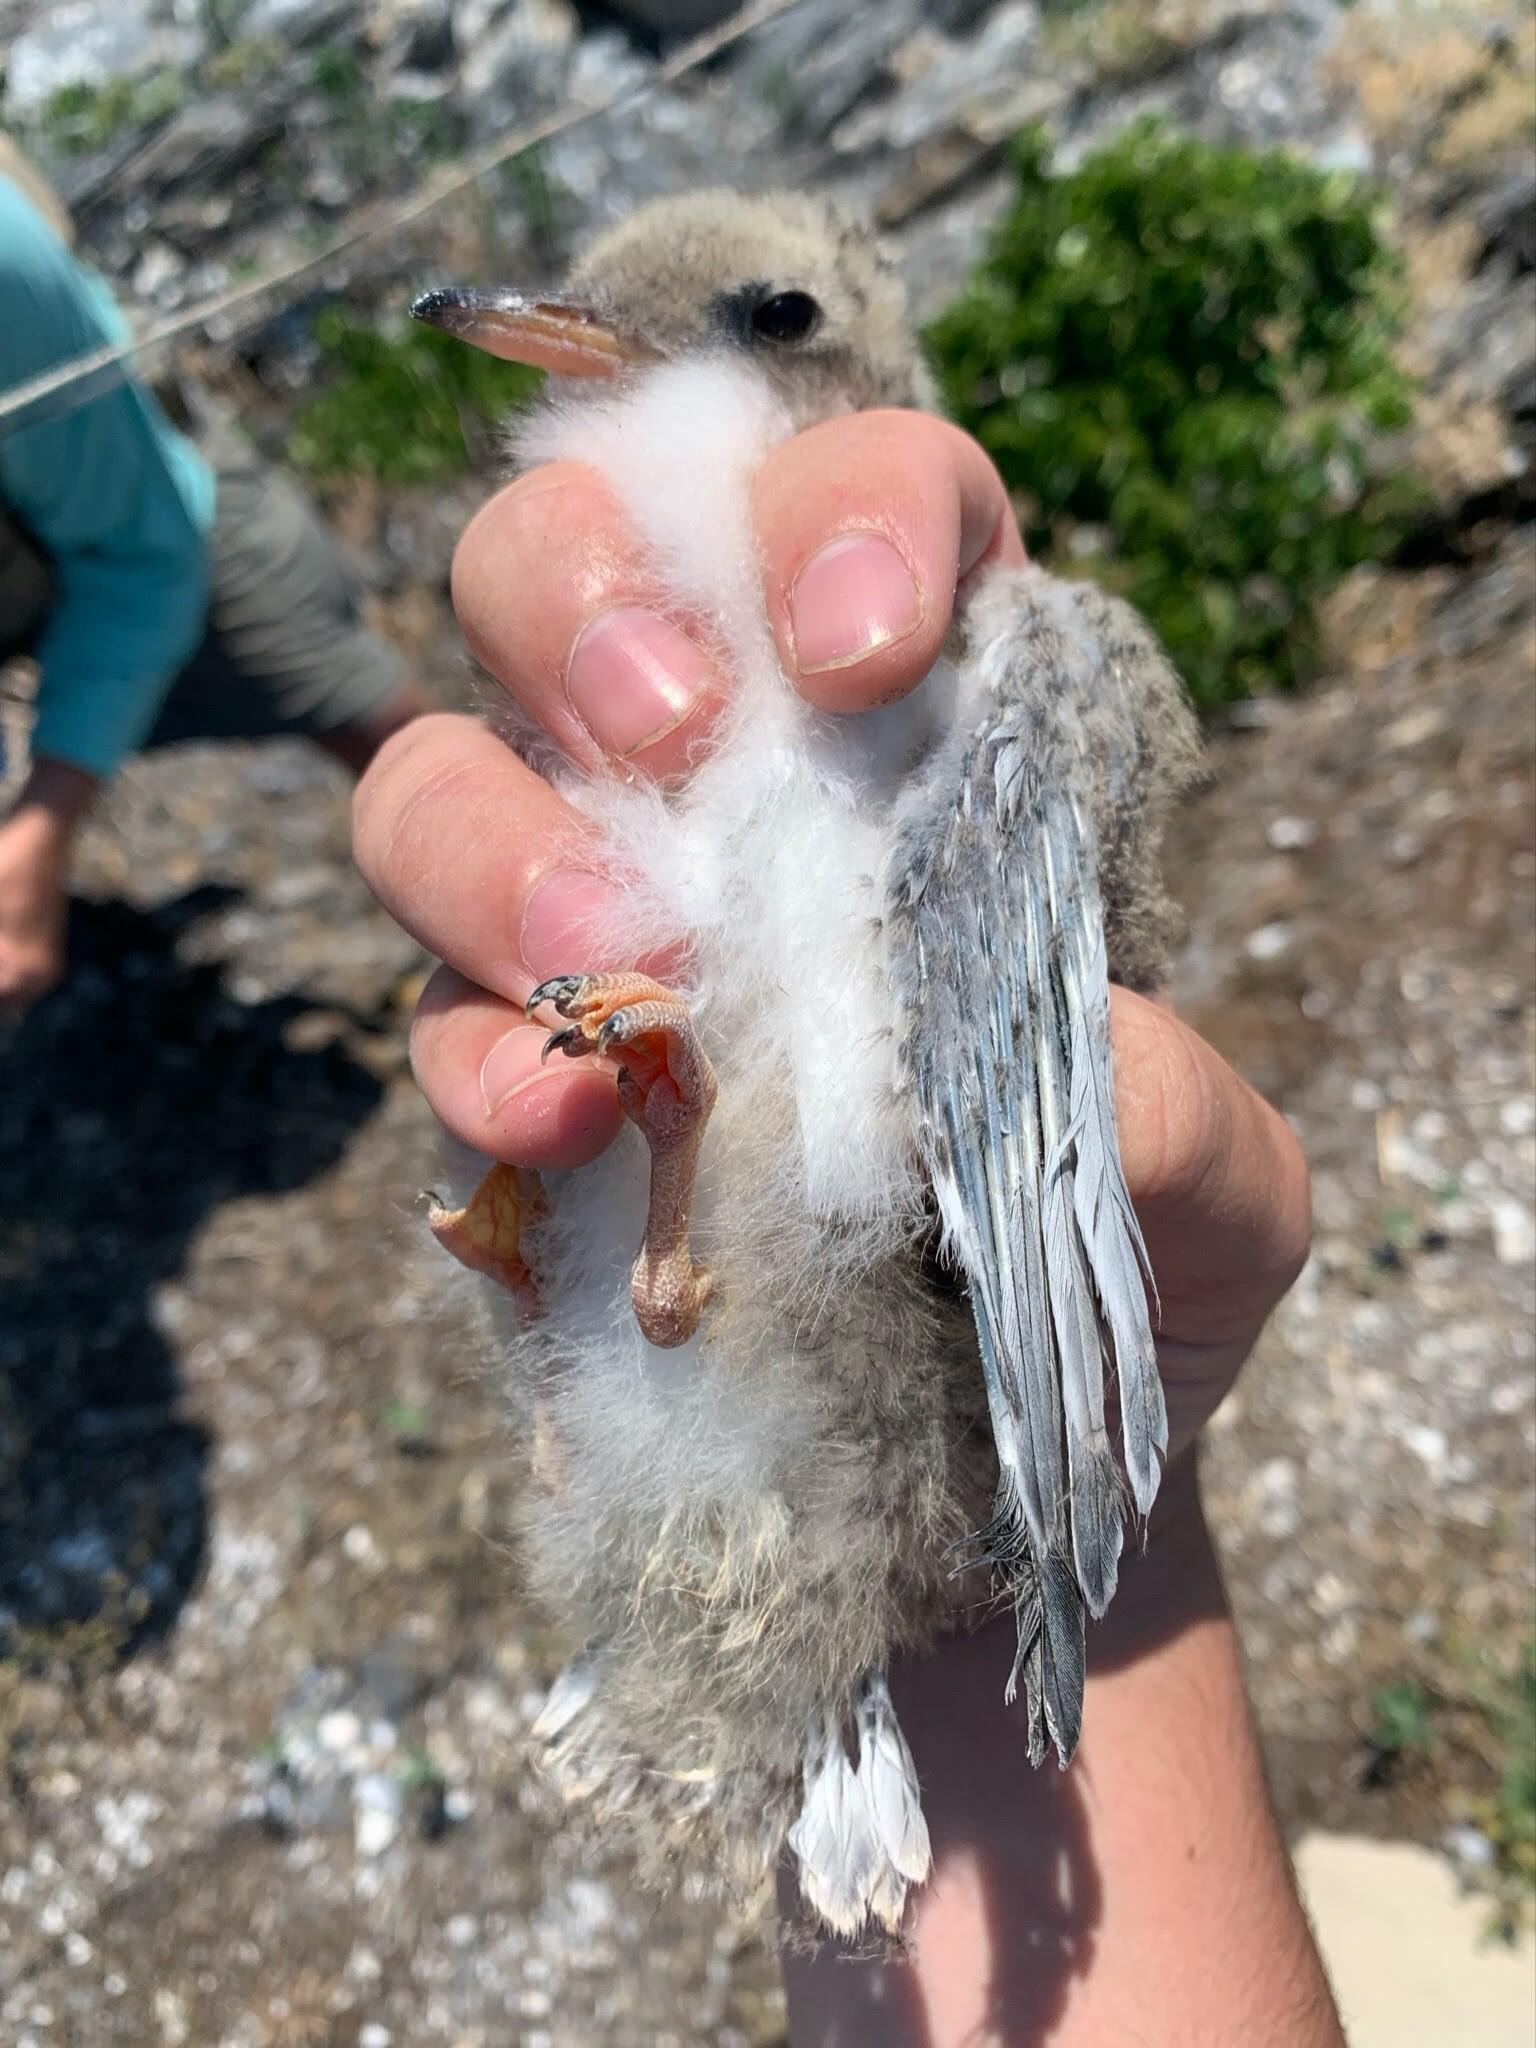 Common Tern chick, aged 10-13 days old.